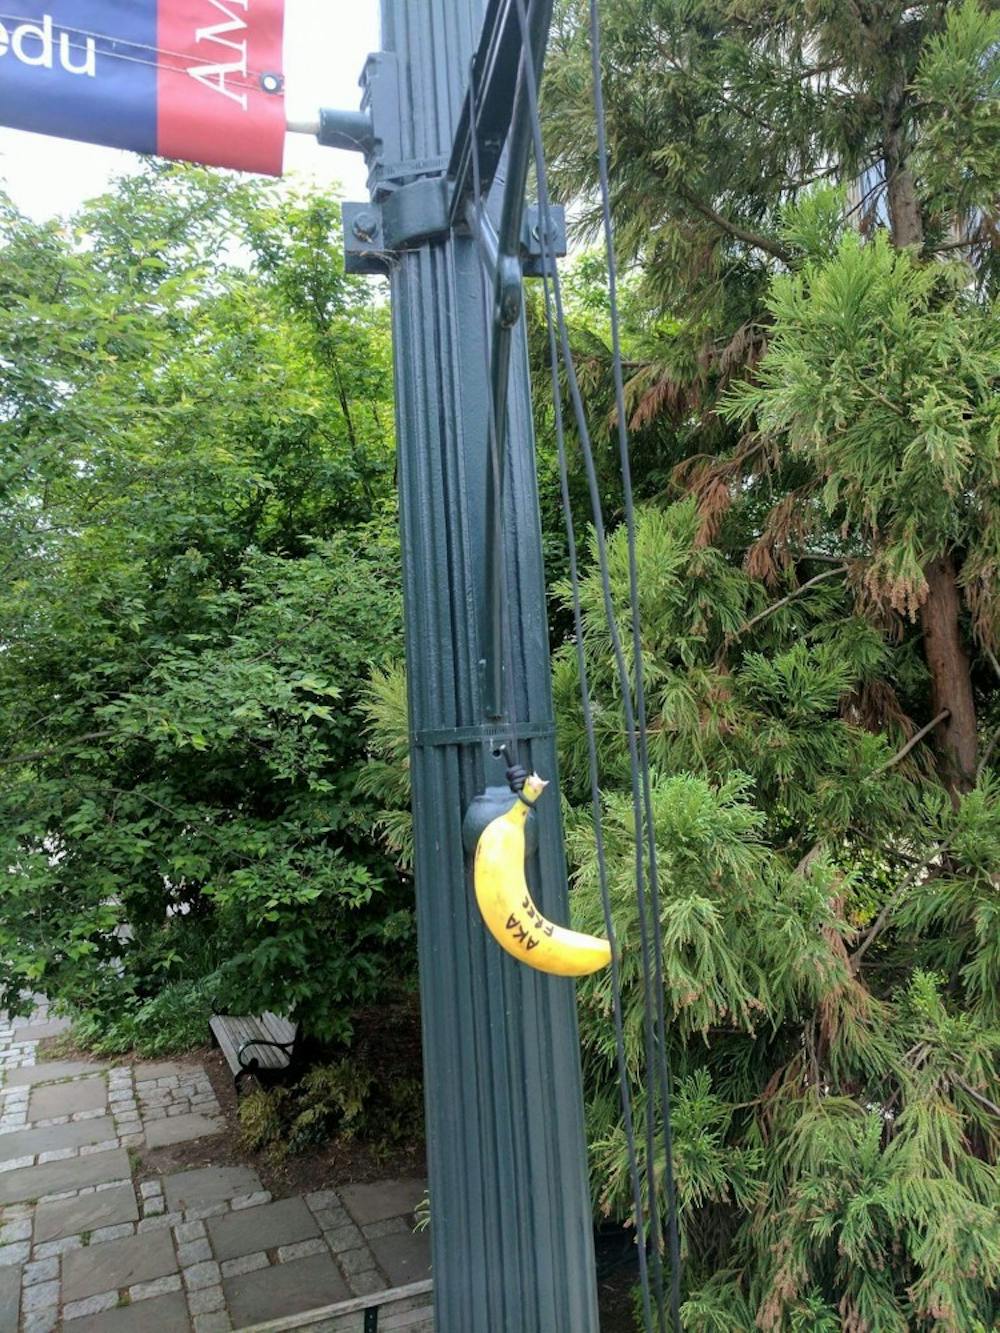 This banana was found outside the Hurst building by Quinn Dunlea, a senior in the School of Public Affairs, on May 1, 2017.&nbsp;